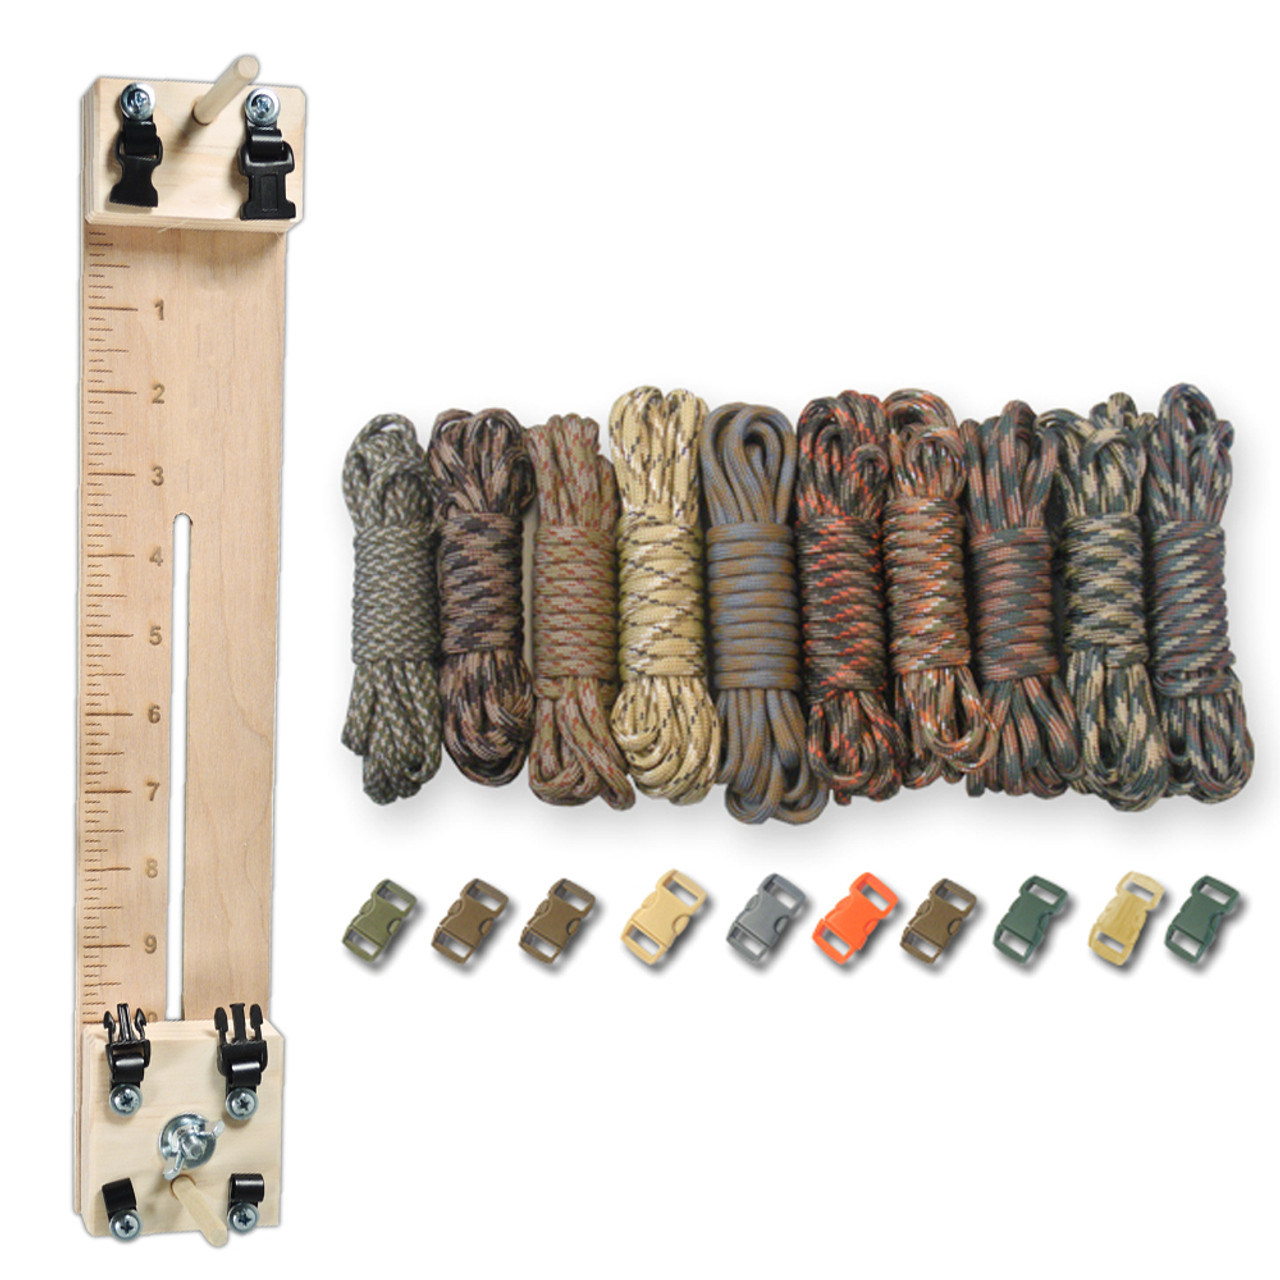 Paracord Combo Crafting Kit with a 10 Pocket Pro Jig - Camo Man